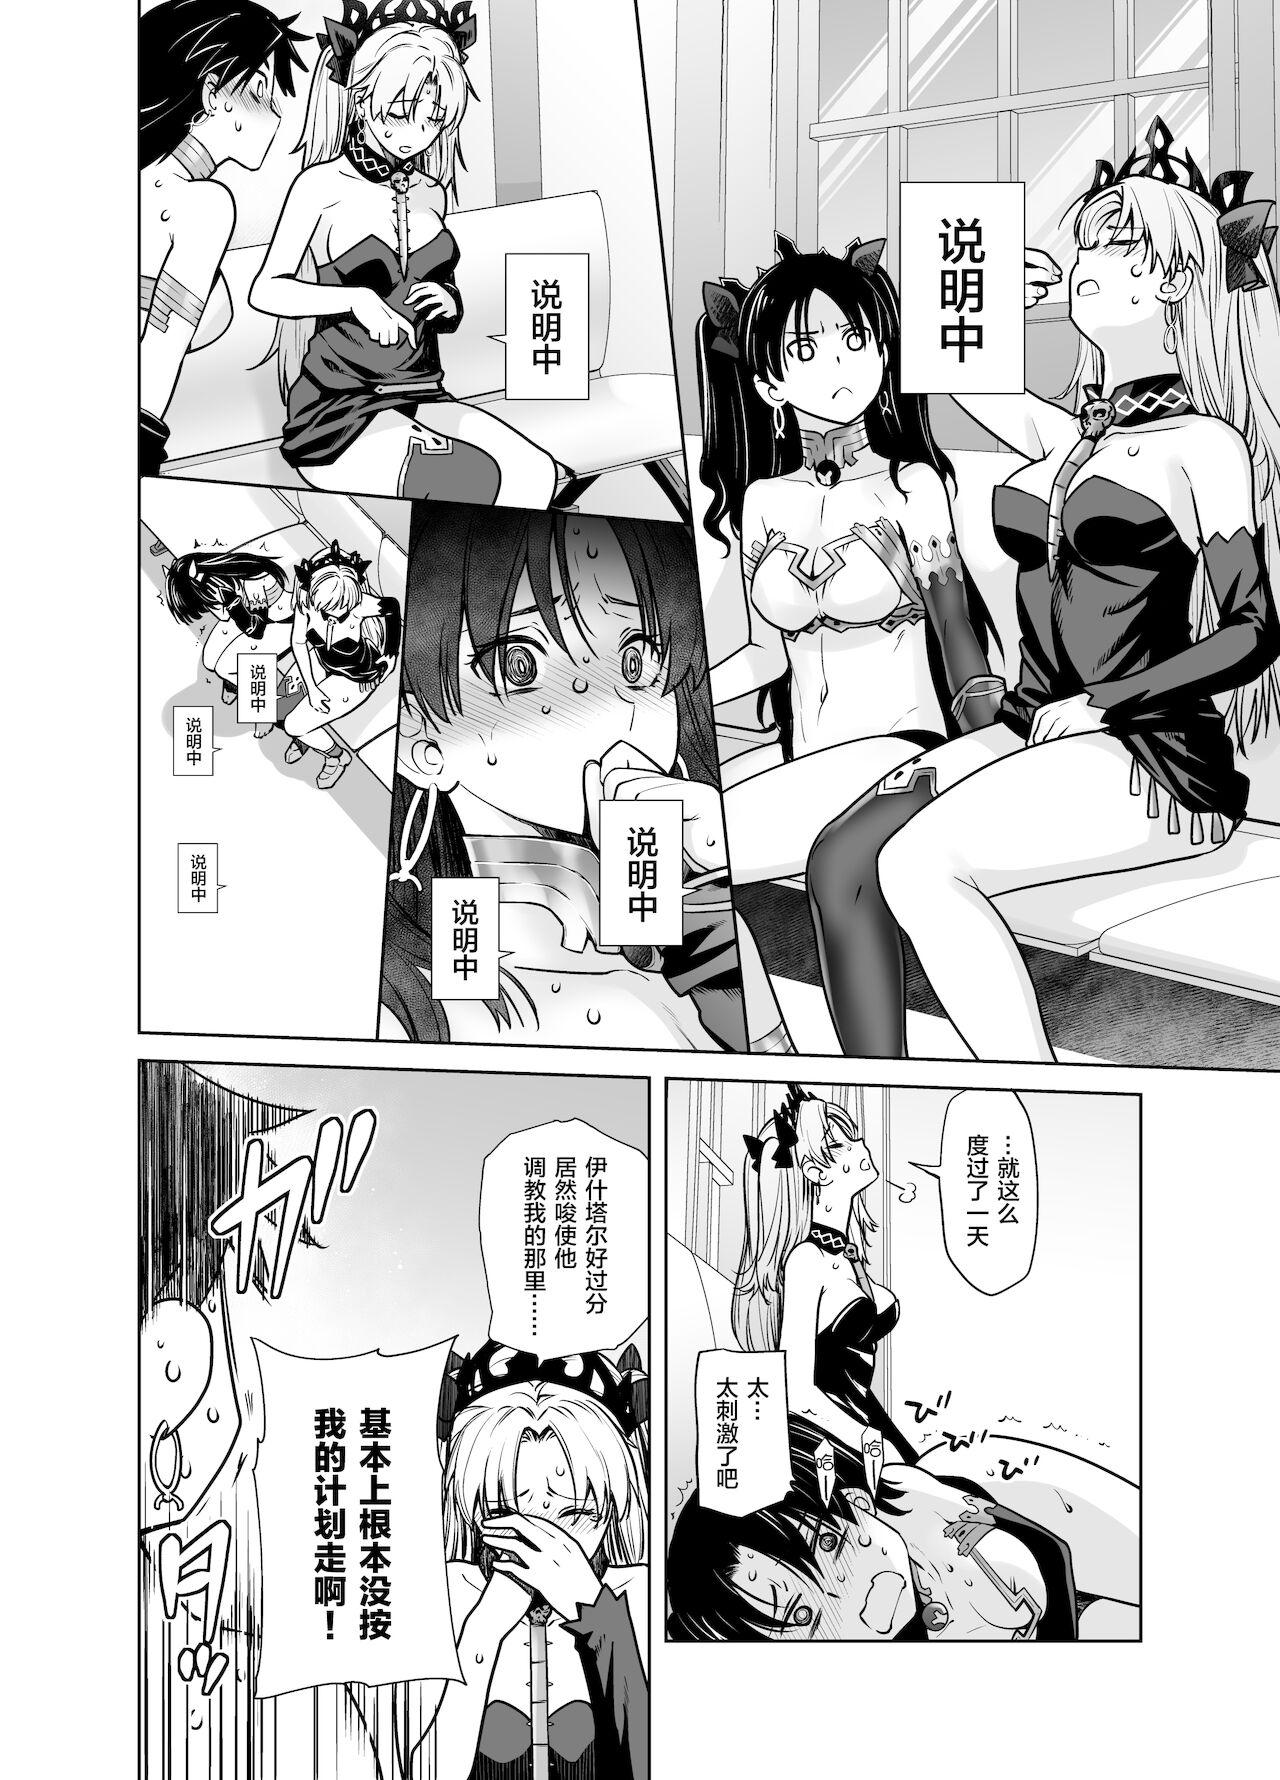 Cbt HEAVEN'S DRIVE 10 - Fate grand order Sissy - Page 8